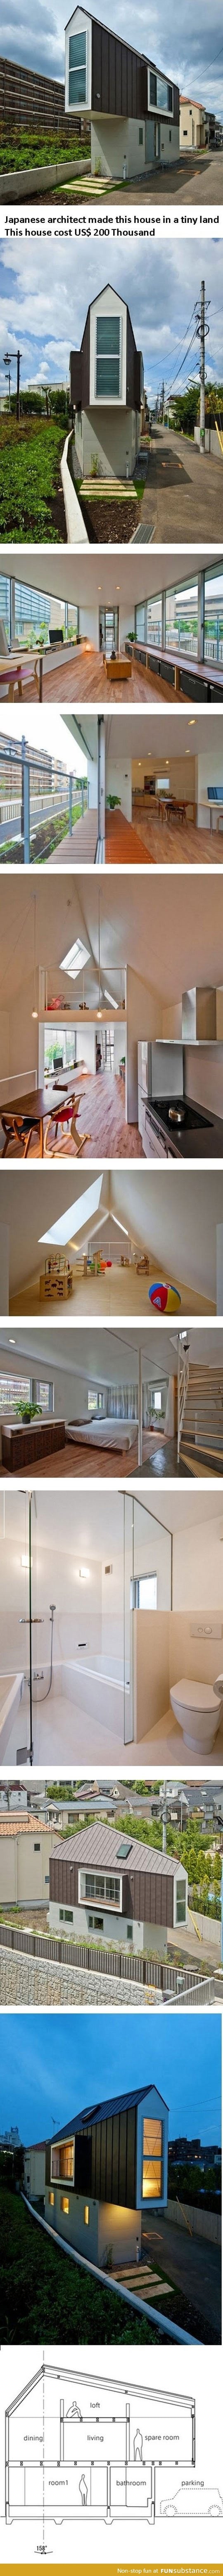 Clever japanese architecture